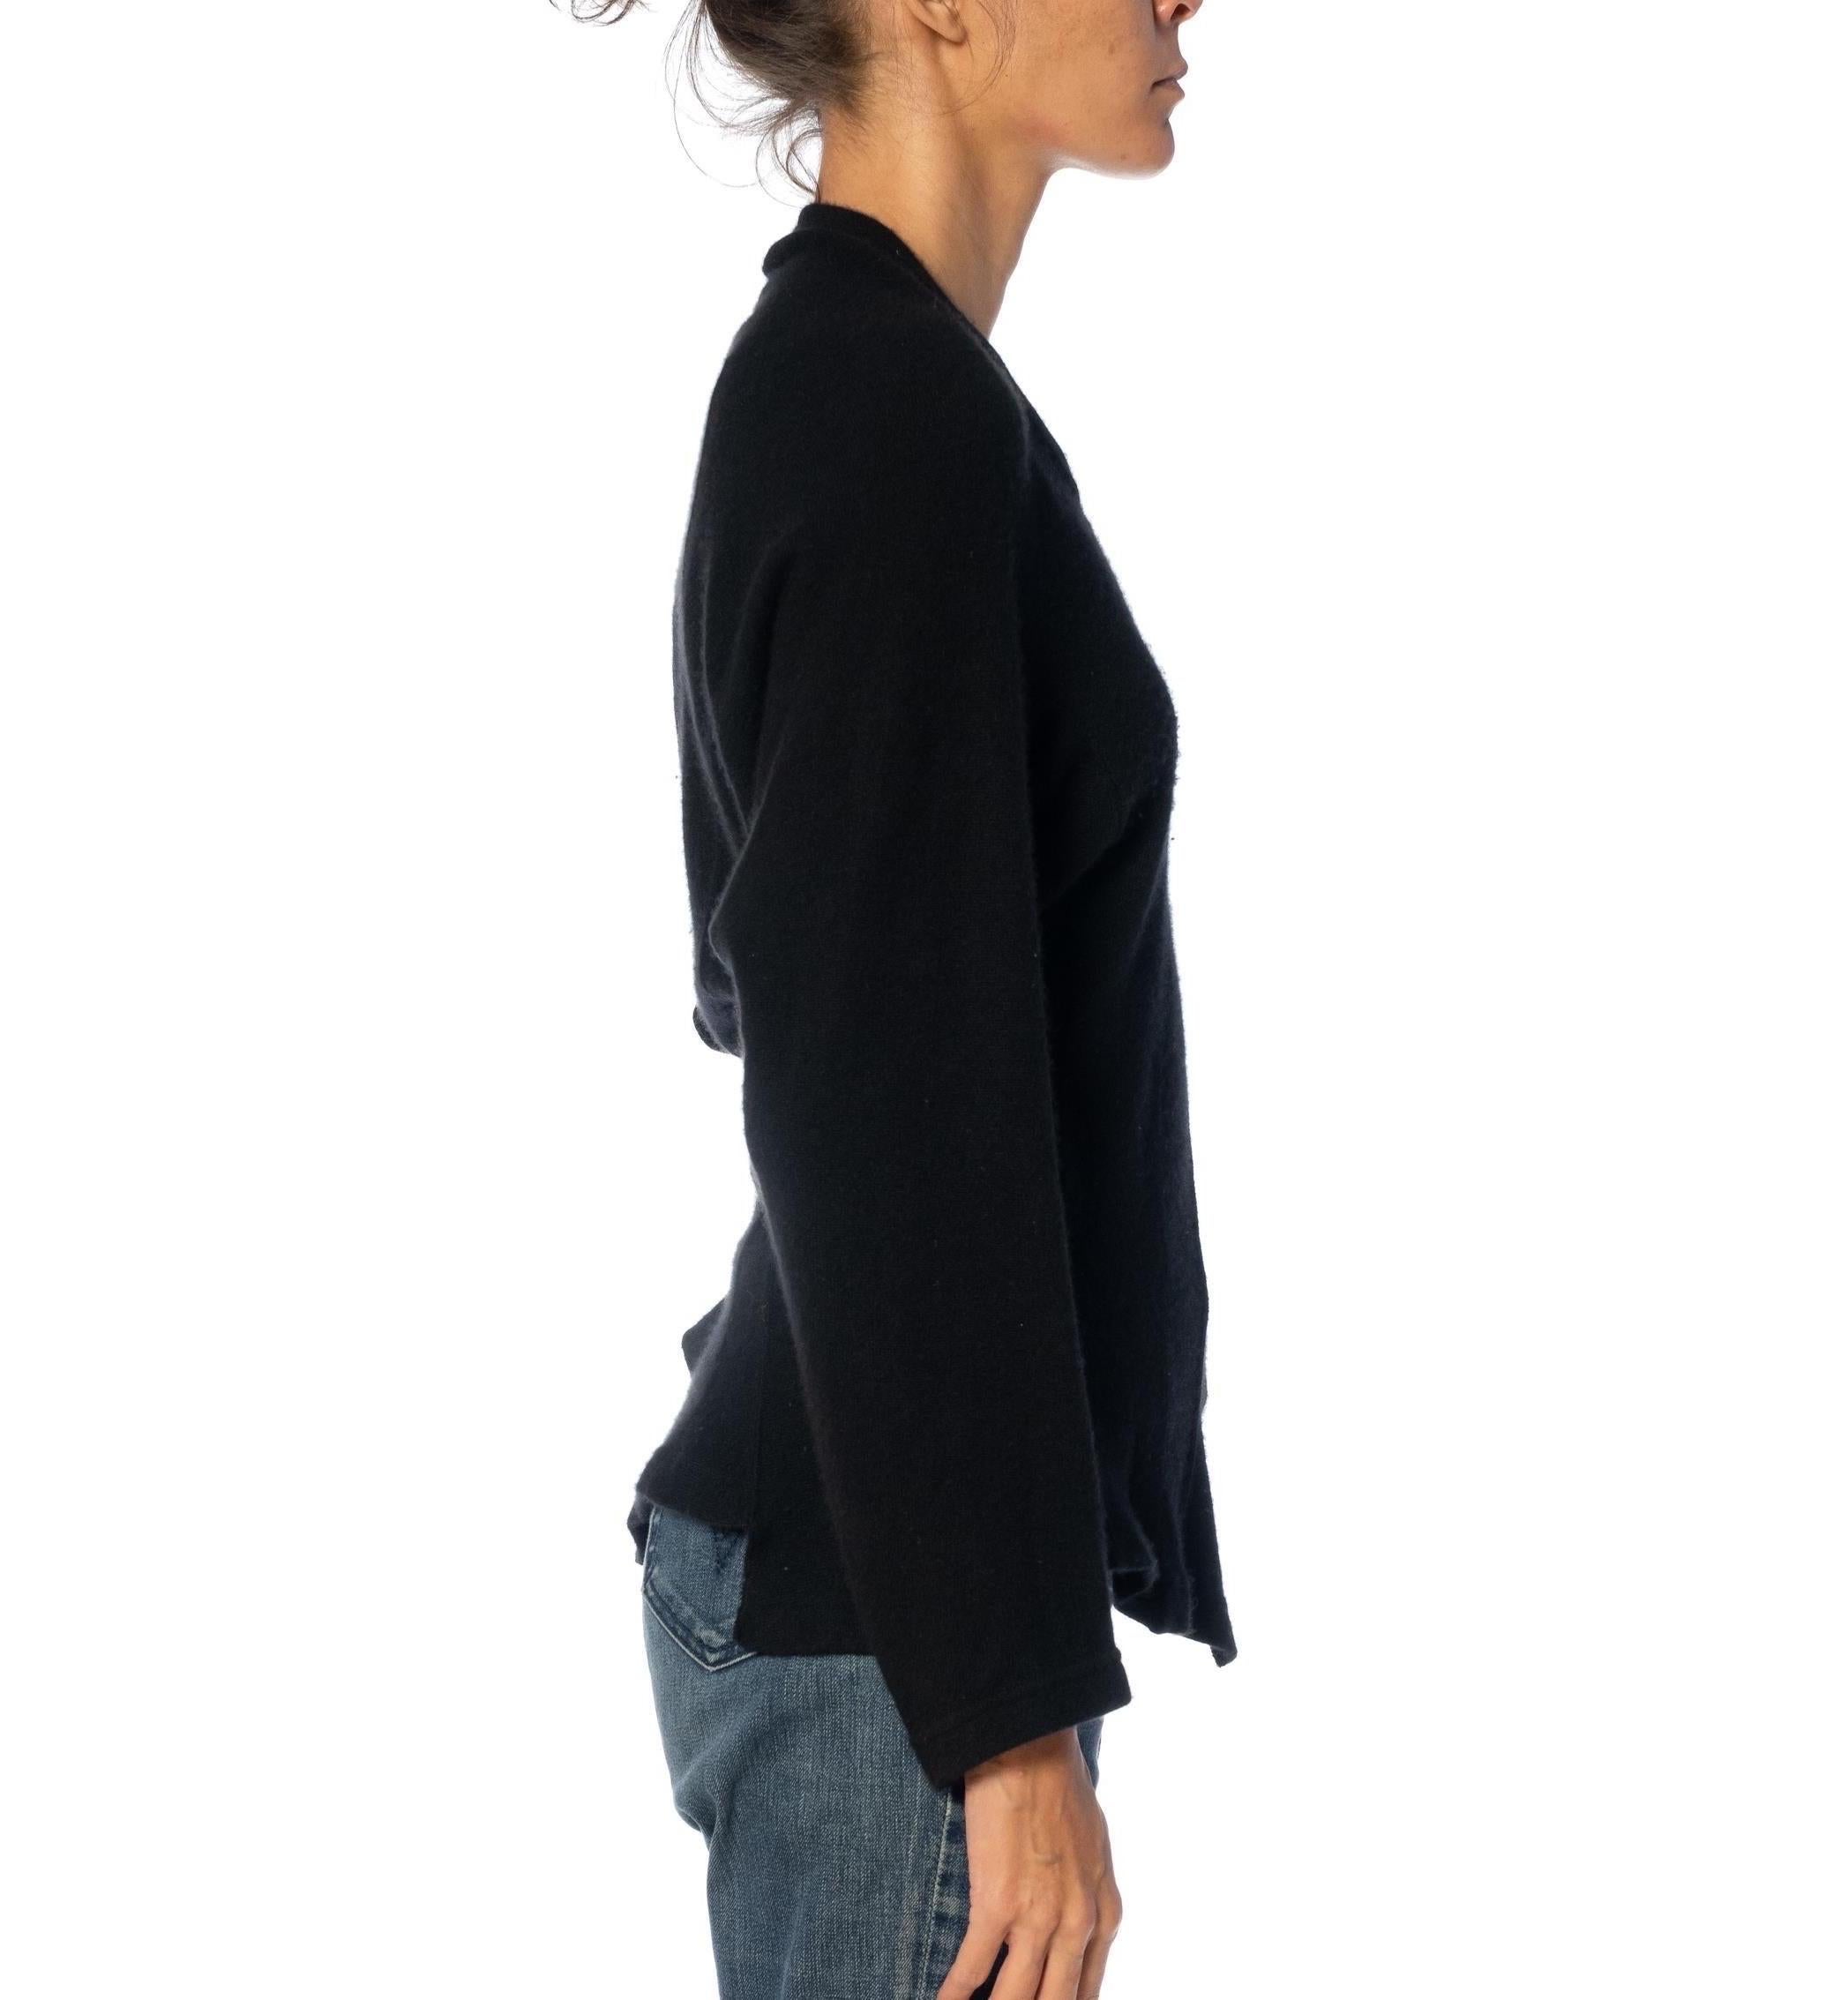 2000S COMME DES GARCONS Black Cashmere Asymmetrically Seamed Sweater 2004 For Sale 1